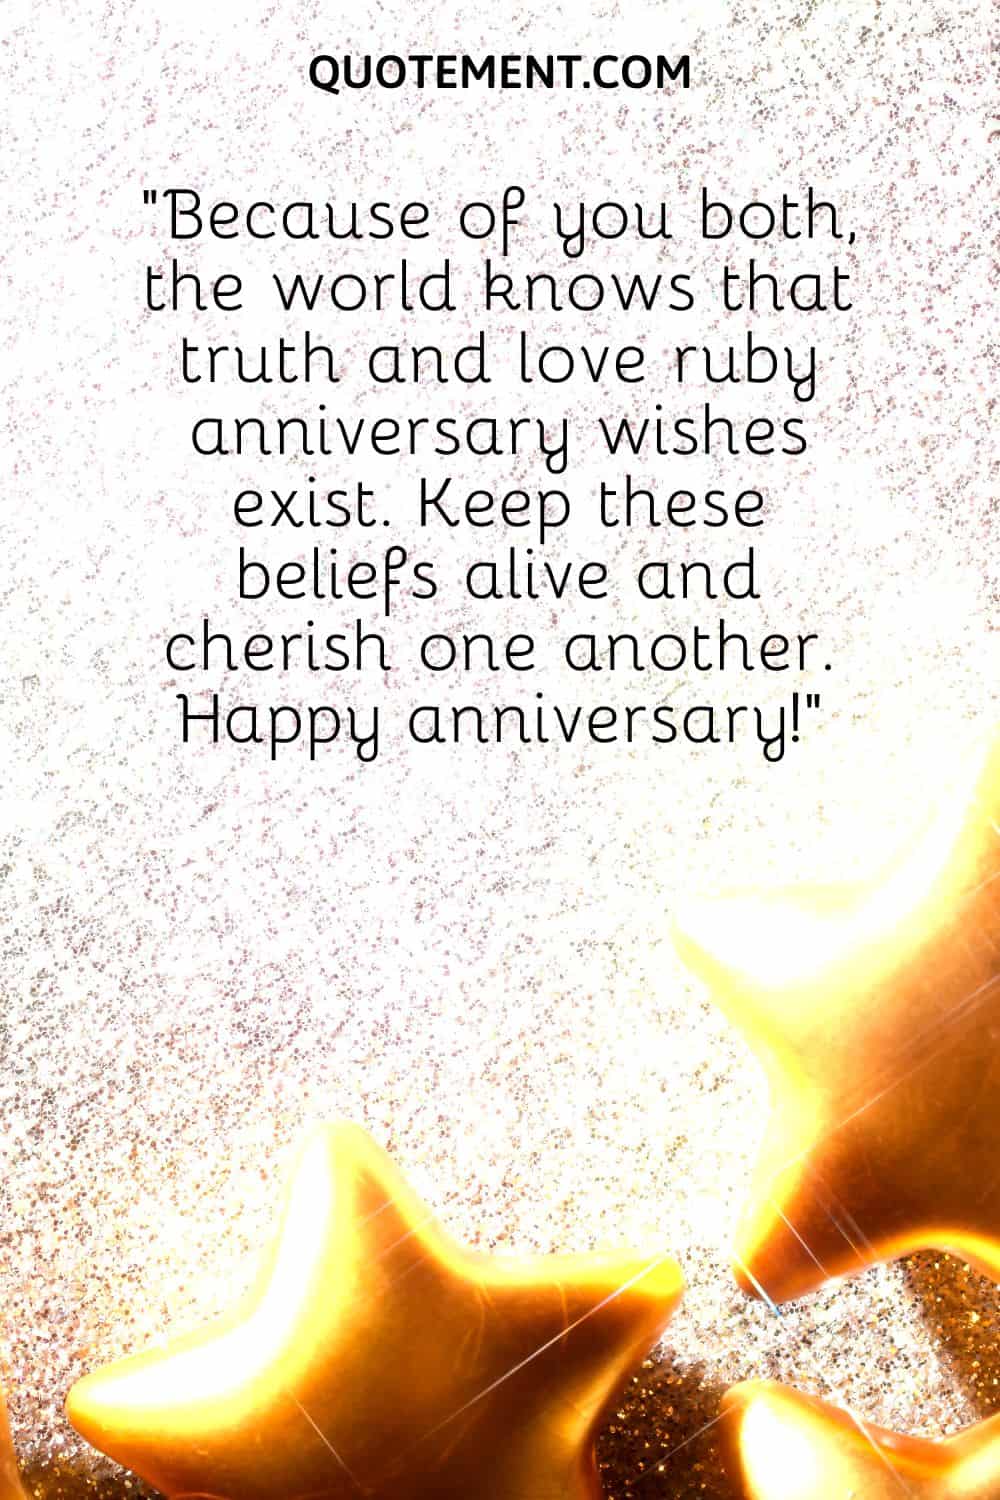 the world knows that truth and love ruby anniversary wishes exist